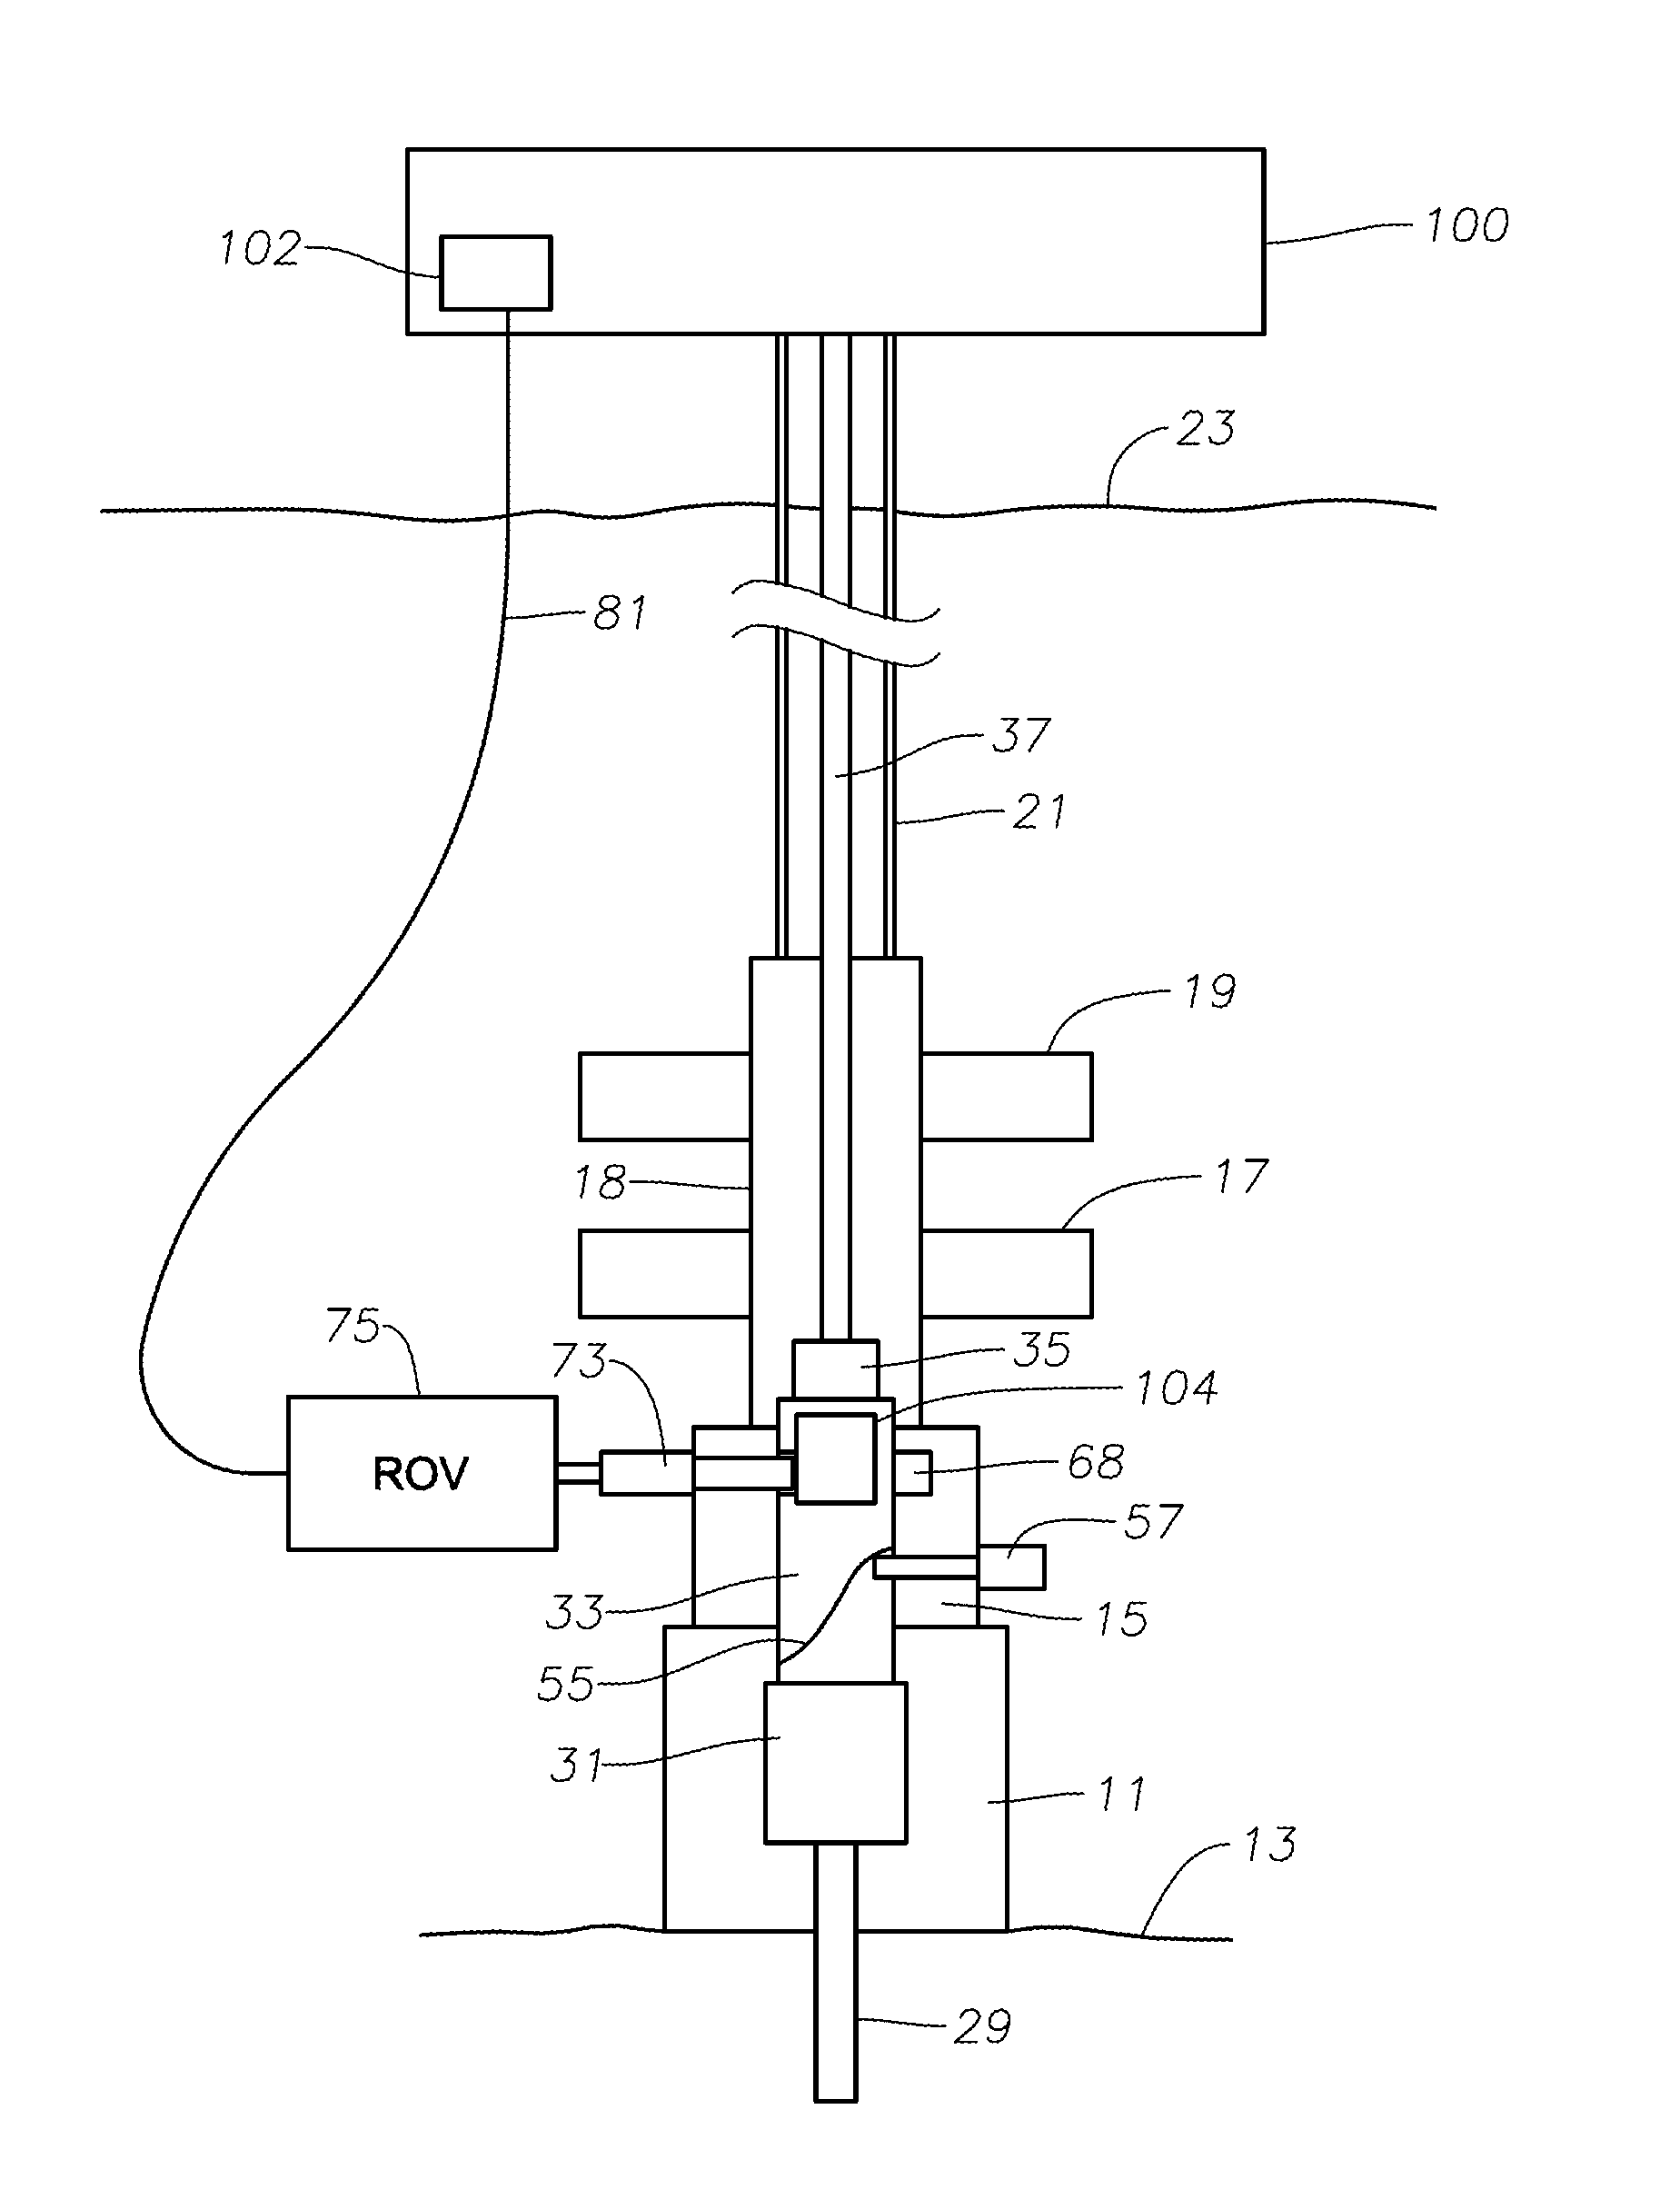 System and method for inductive signal and power transfer from ROV to in riser tools